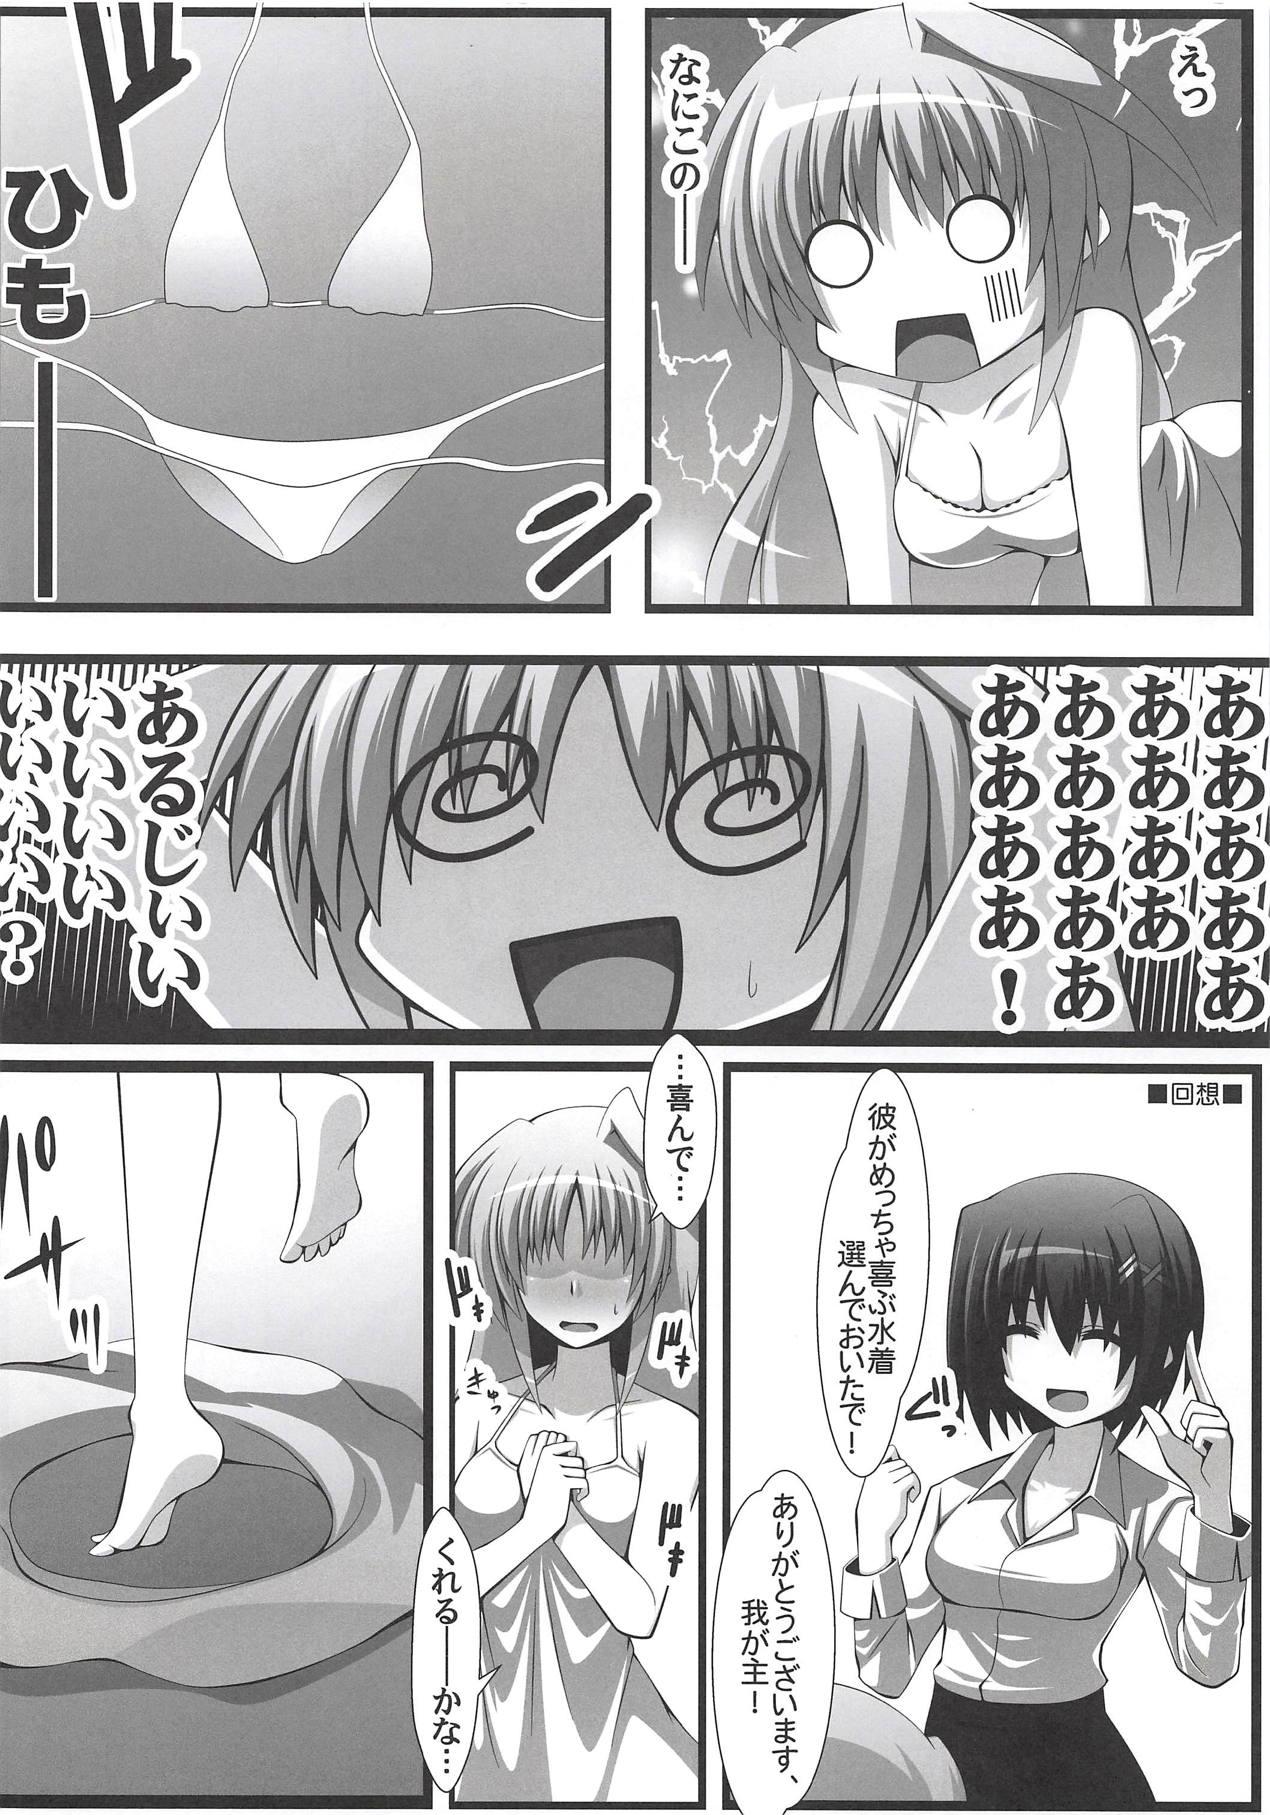 Pigtails Eins to Physical Unison - Mahou shoujo lyrical nanoha Porn - Page 7